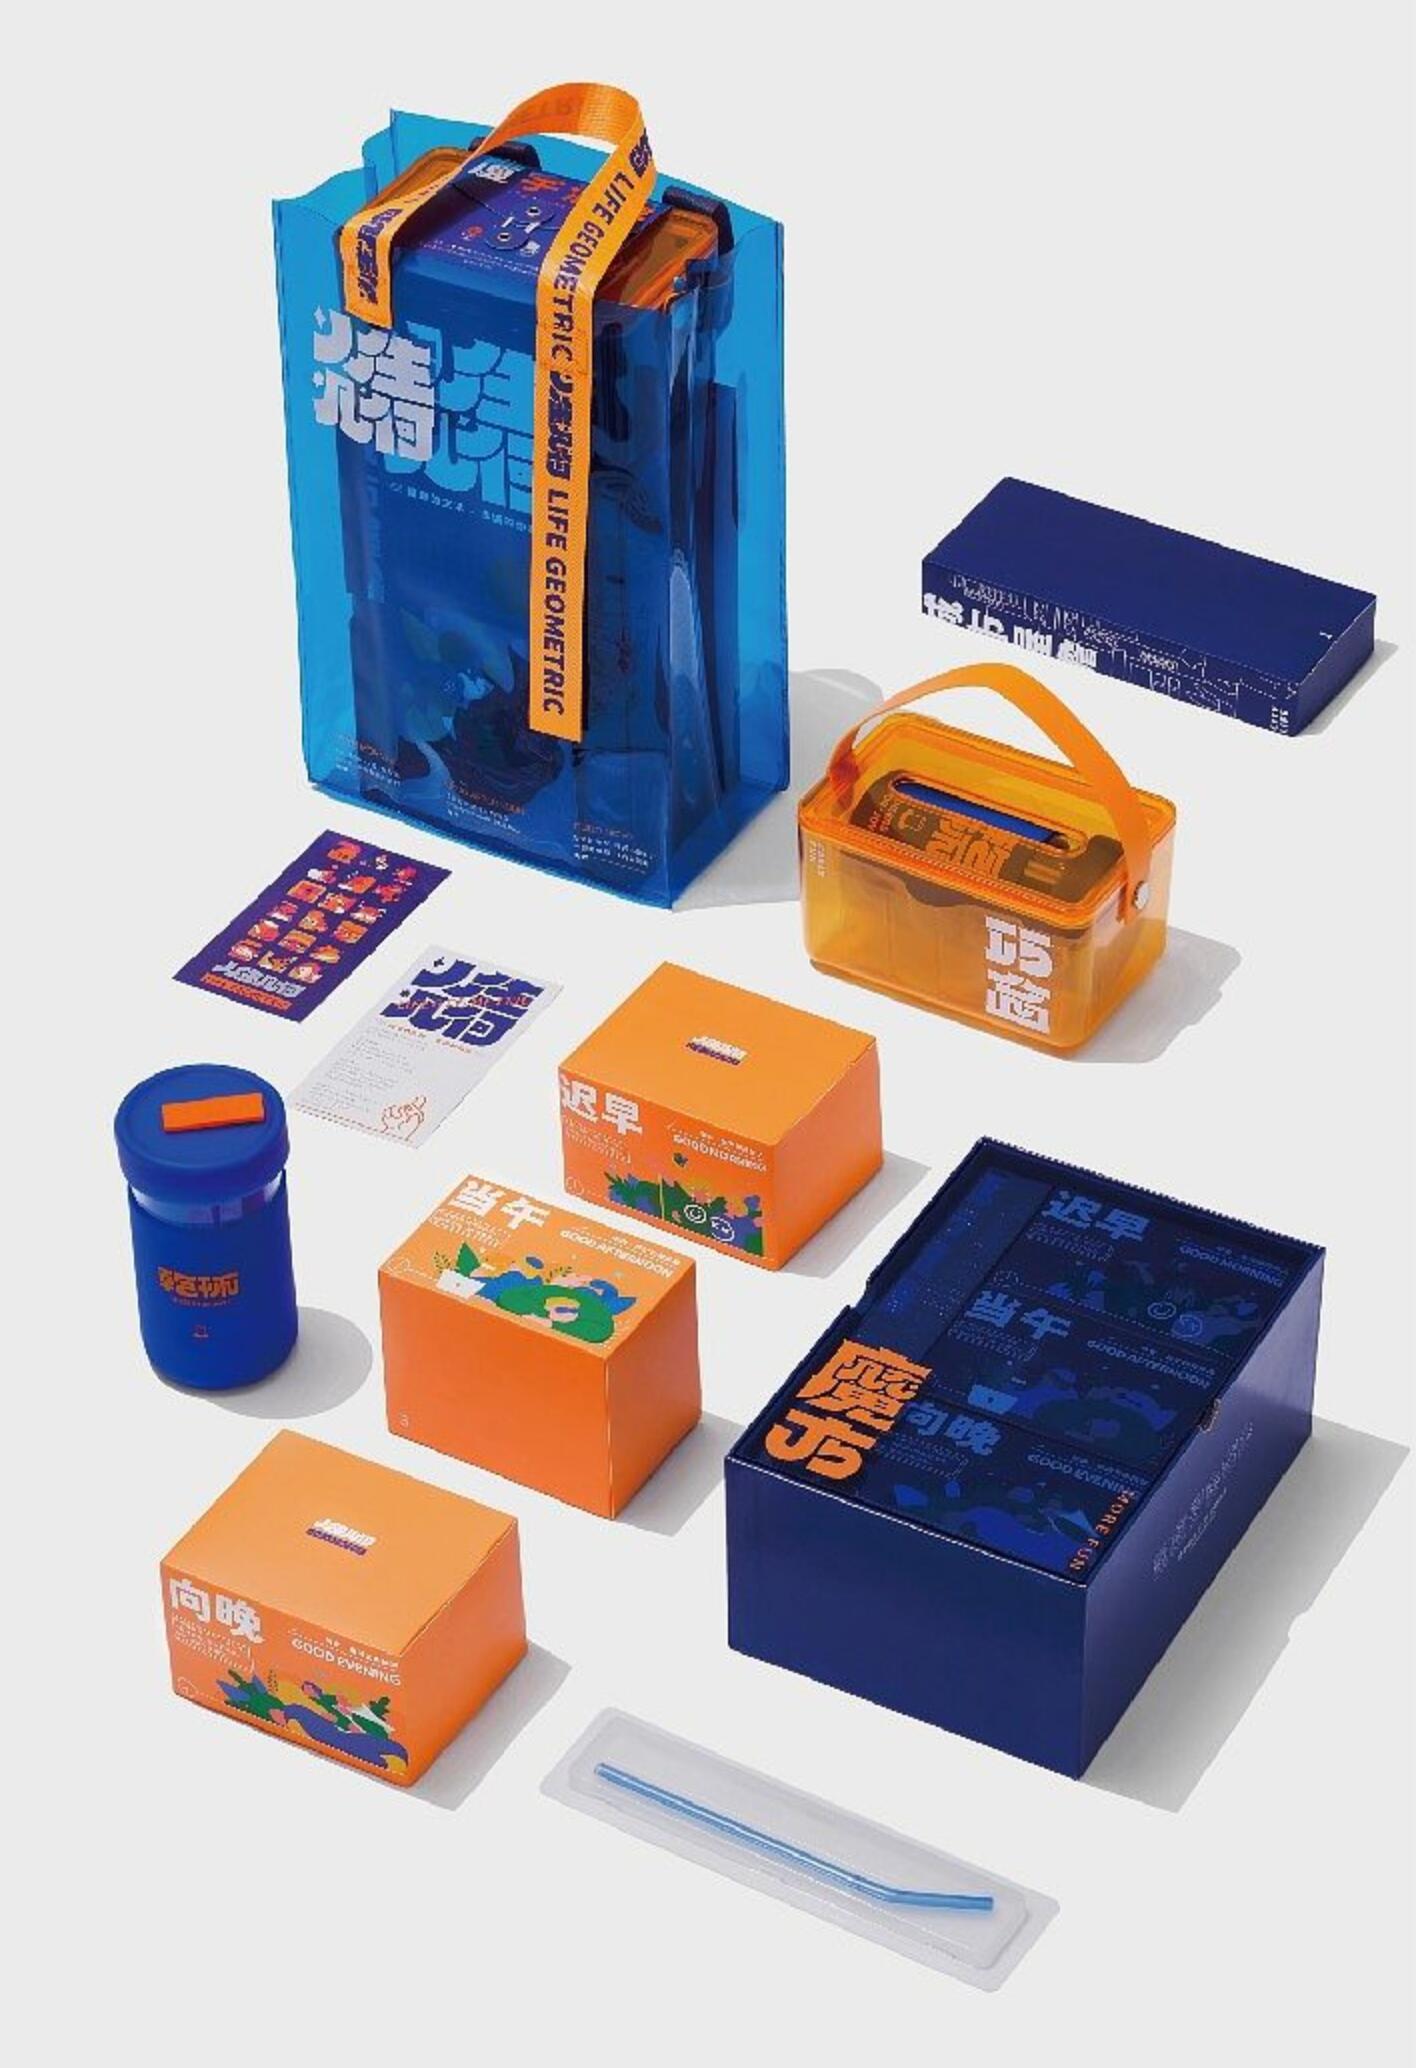 Localization and Cultural Heritage in Packaging Box Design